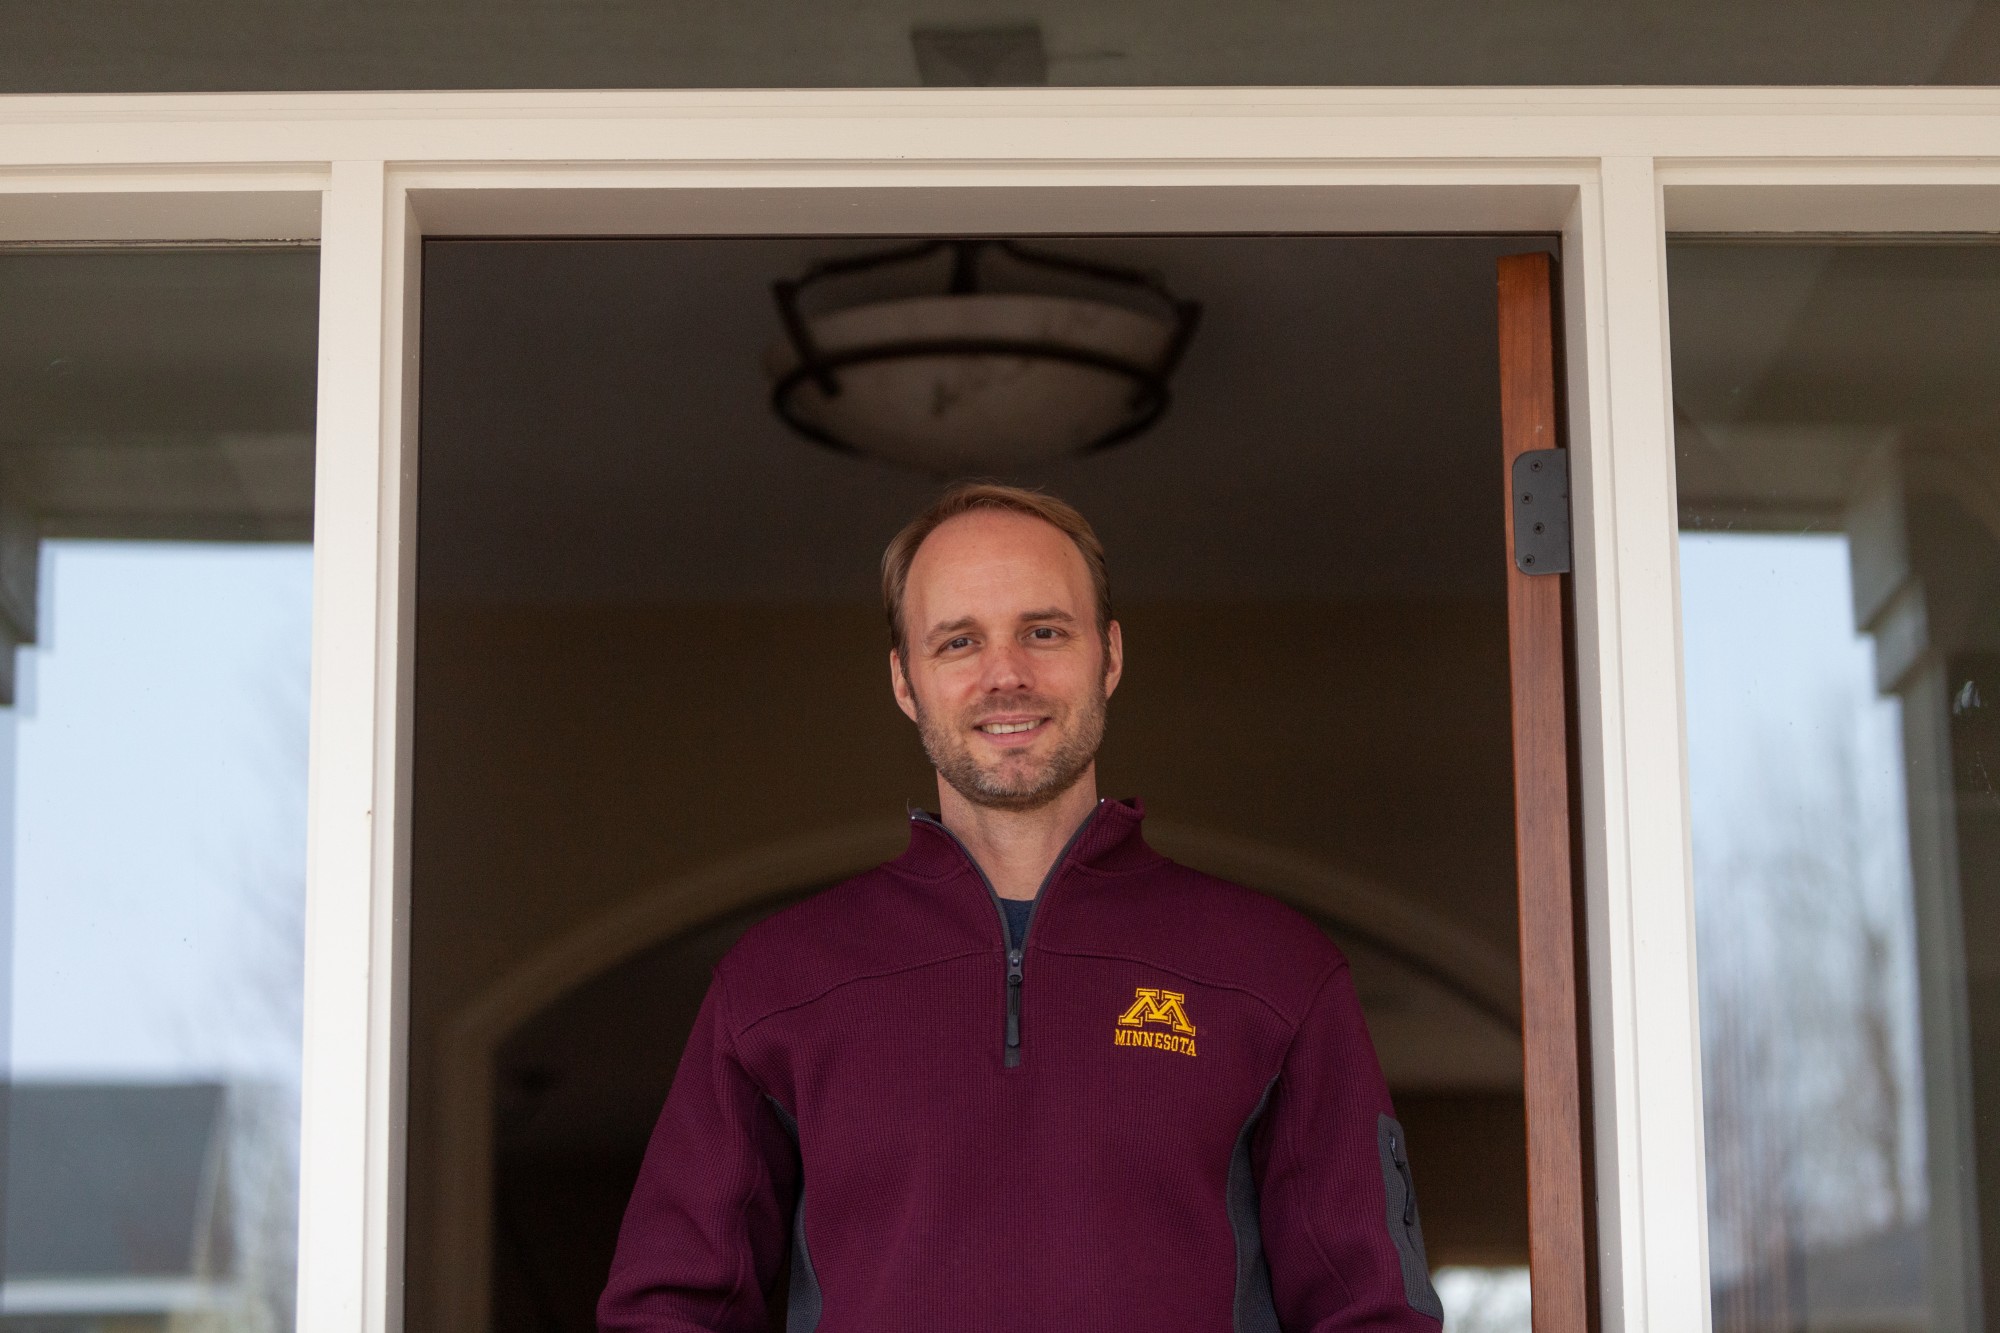 Associate Professor of Epidemiology Ryan Demmer, PhD., poses for a portrait in his home on Friday, April 10. Demmer is leading a research effort aimed at collecting data on asymptomatic infection rates of COVID-19 among Twin-Cities healthcare workers.